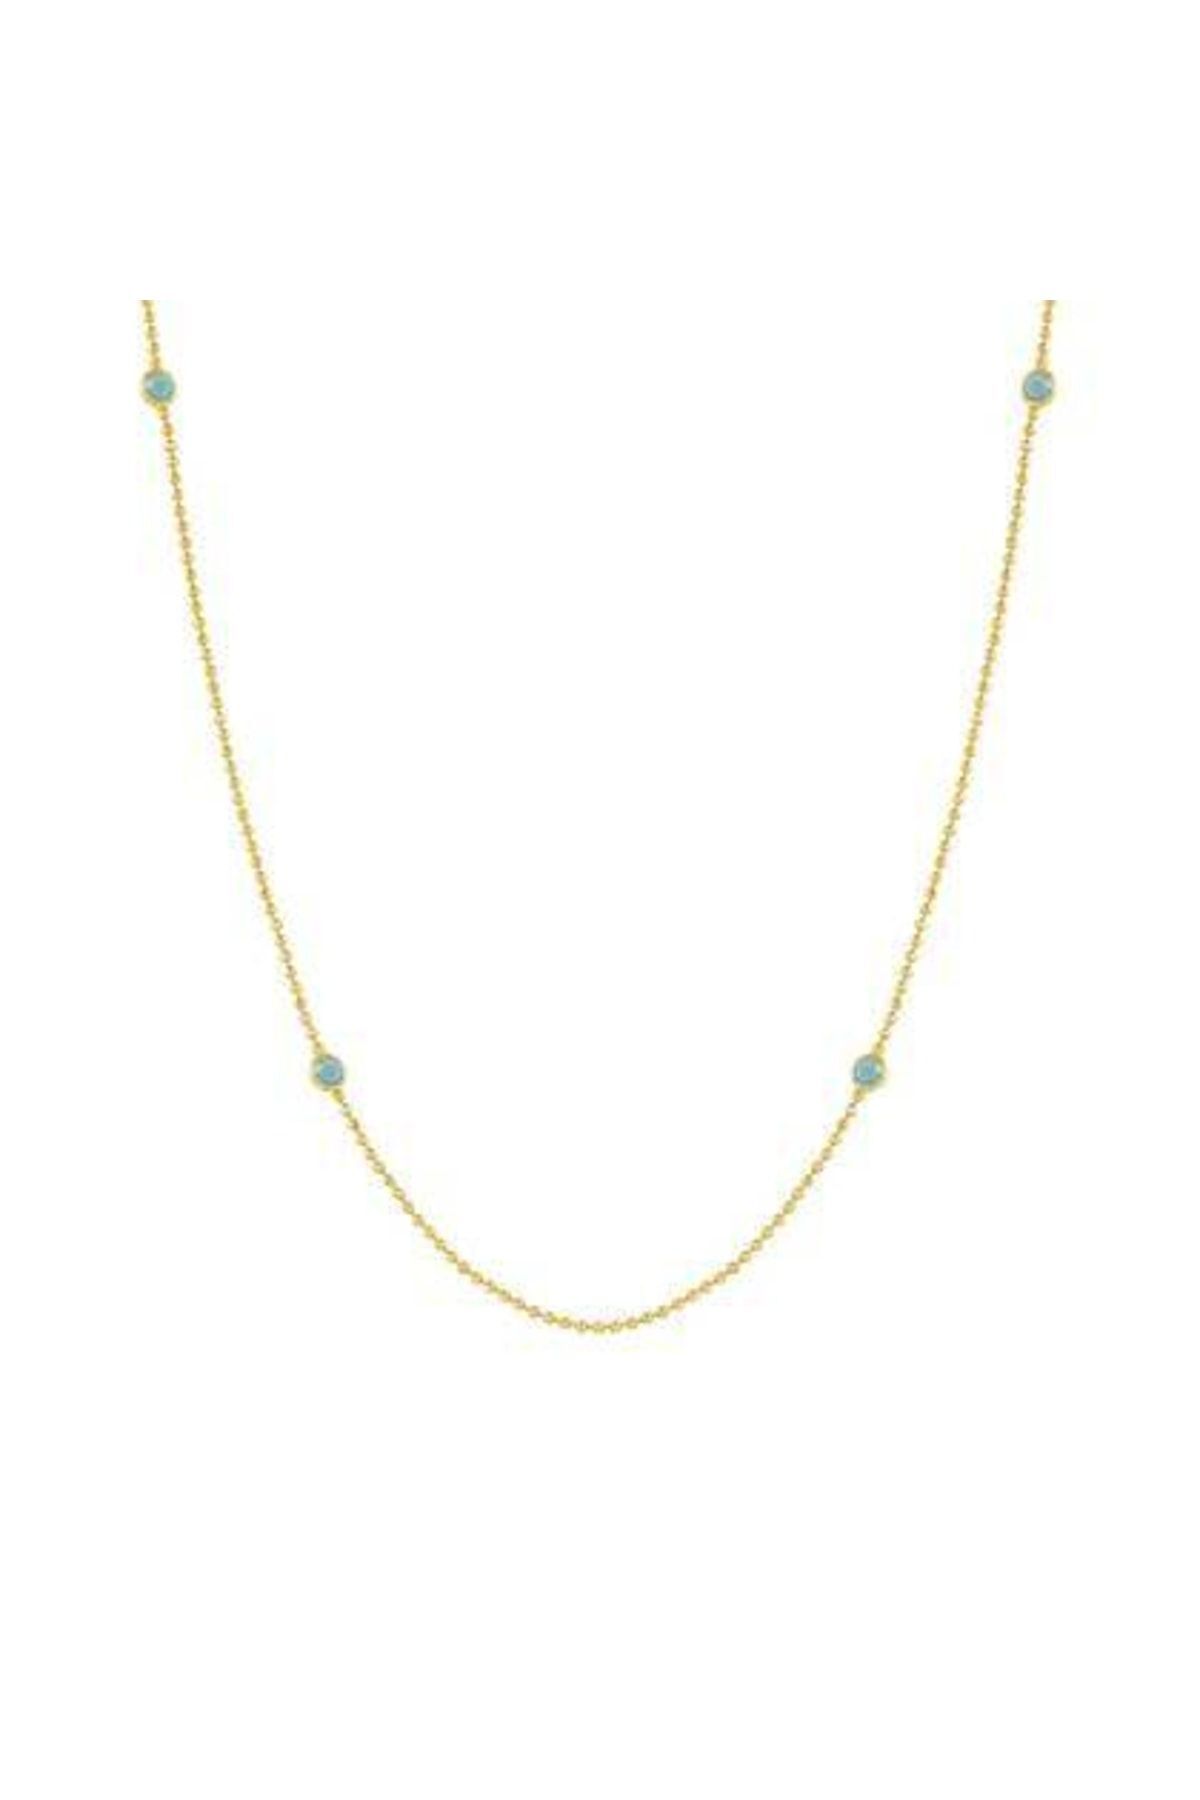 NOMİNATİON Bella Necklace Ed, Bloom In 925 Silver And Crystals (long) (038_turquoise With Yellow Gold Fin)